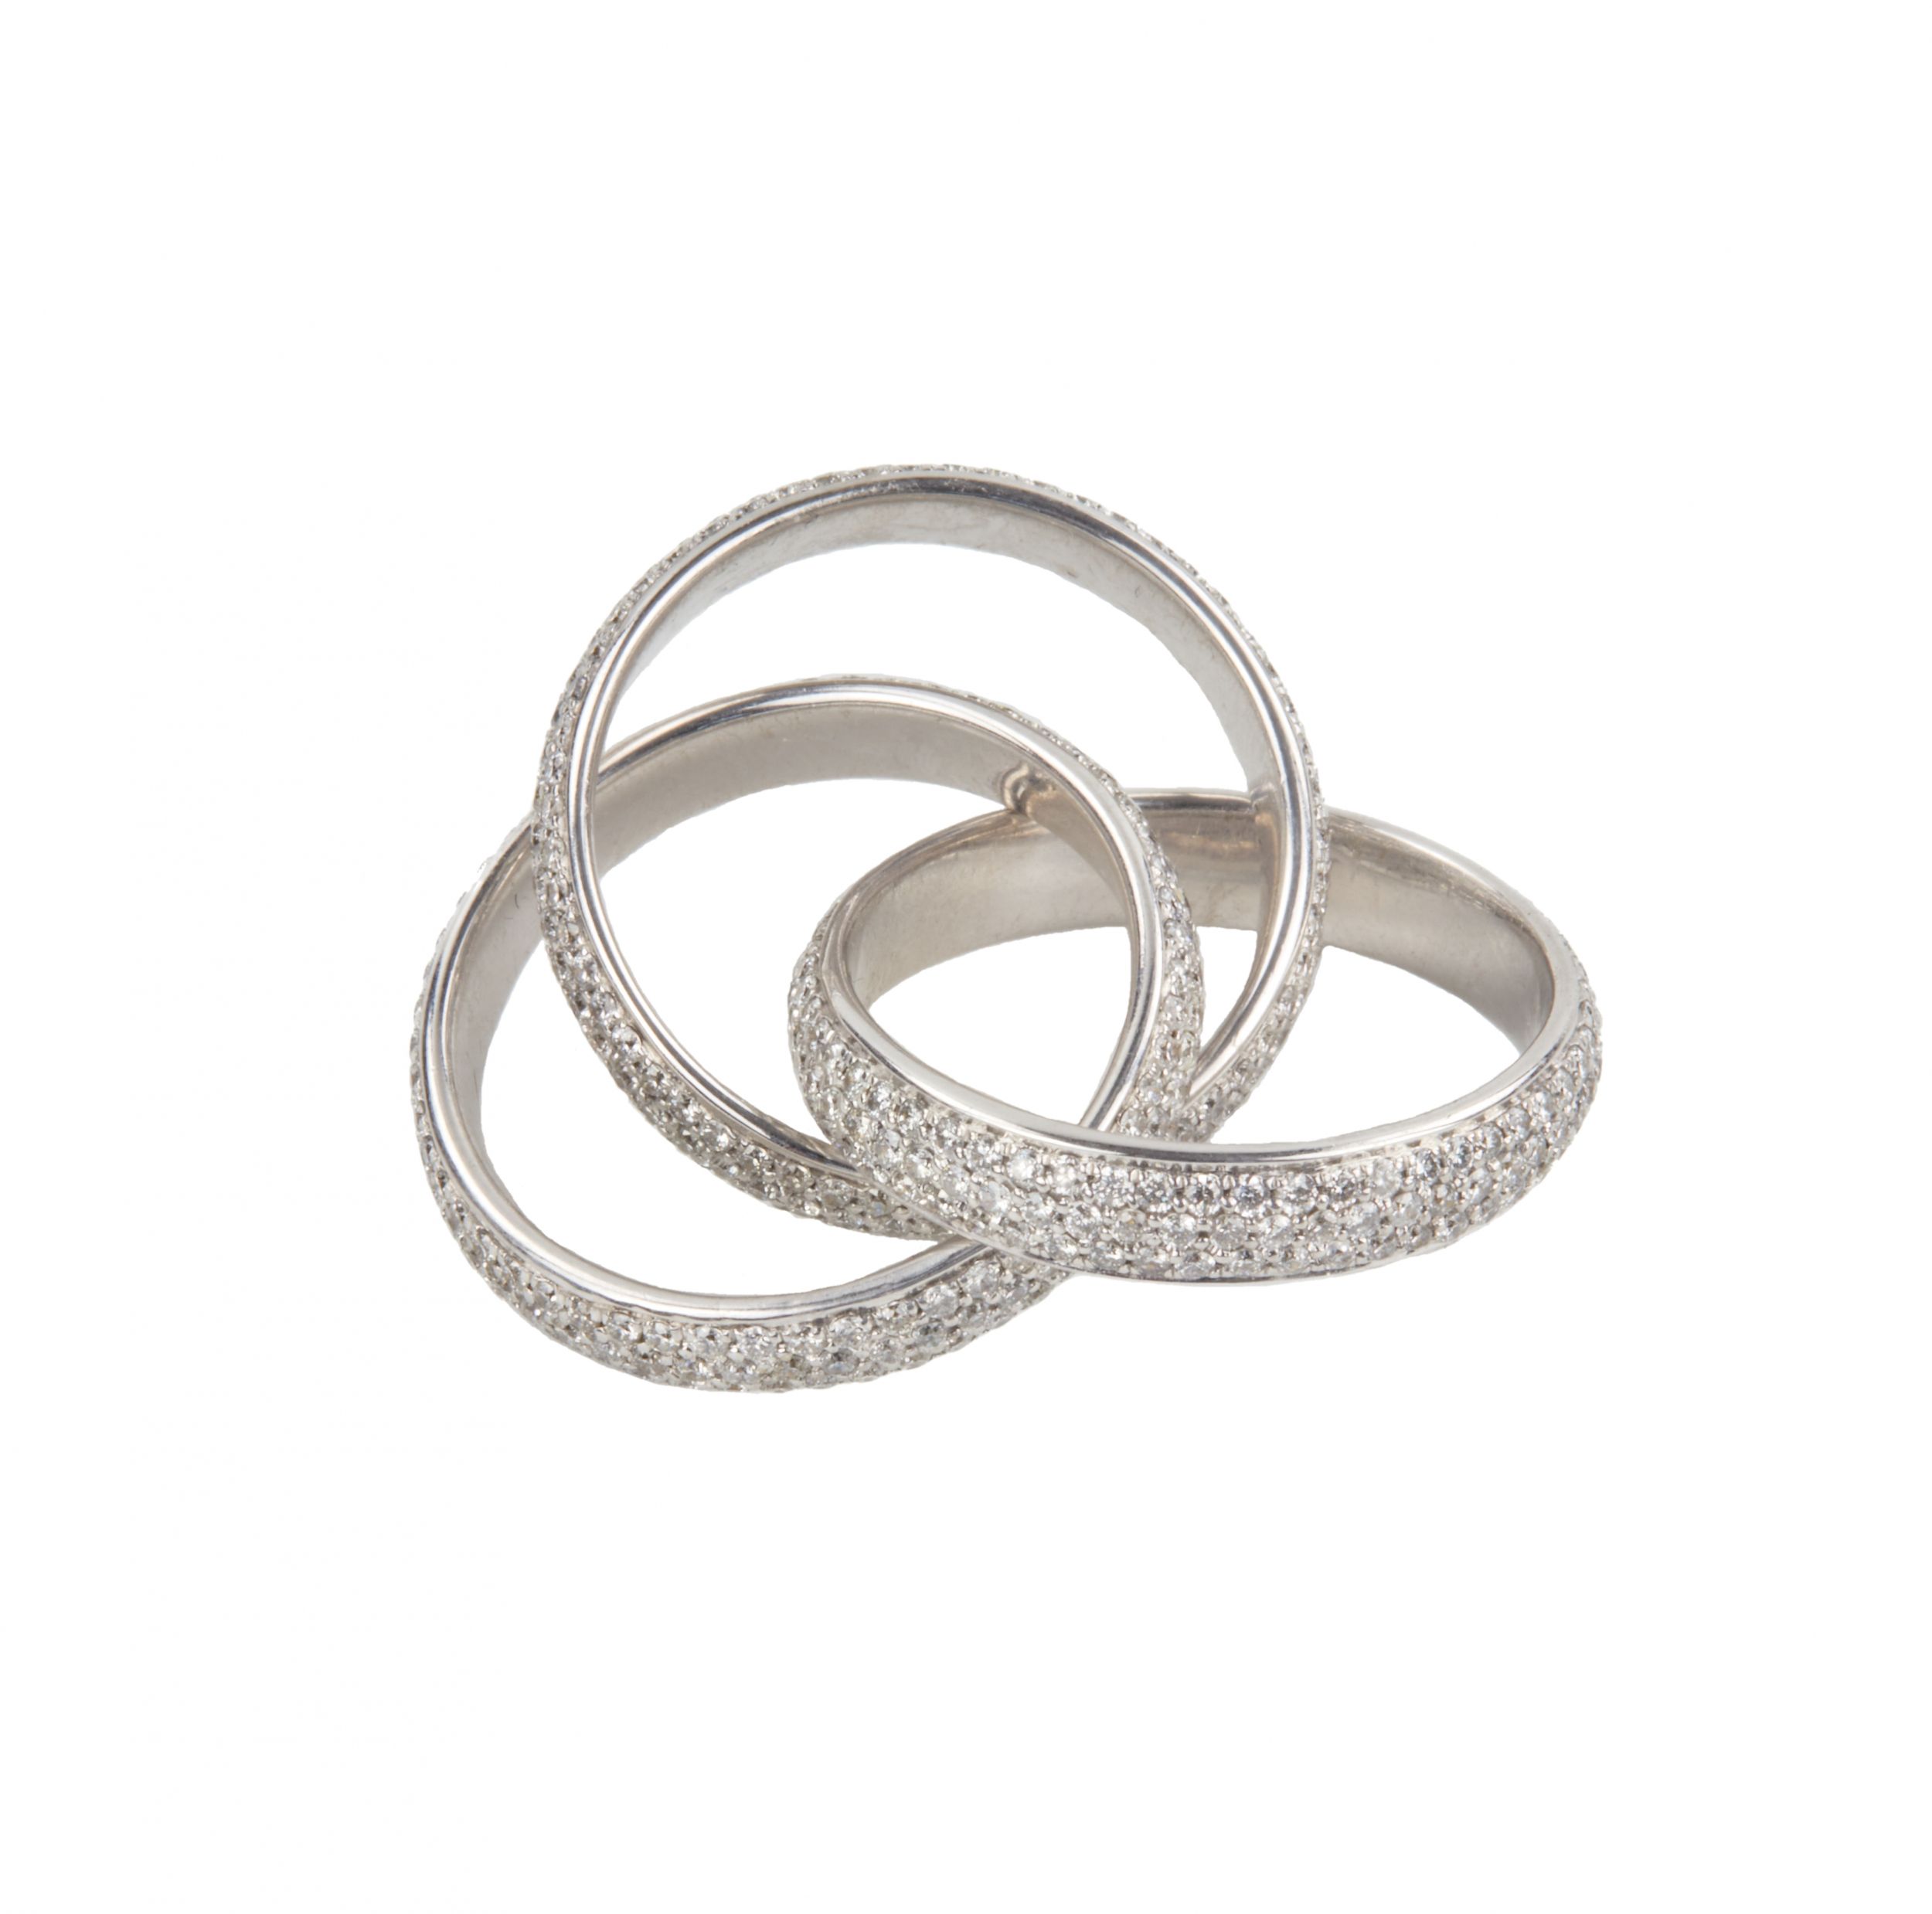 18K White gold ring with diamonds. - Image 5 of 6